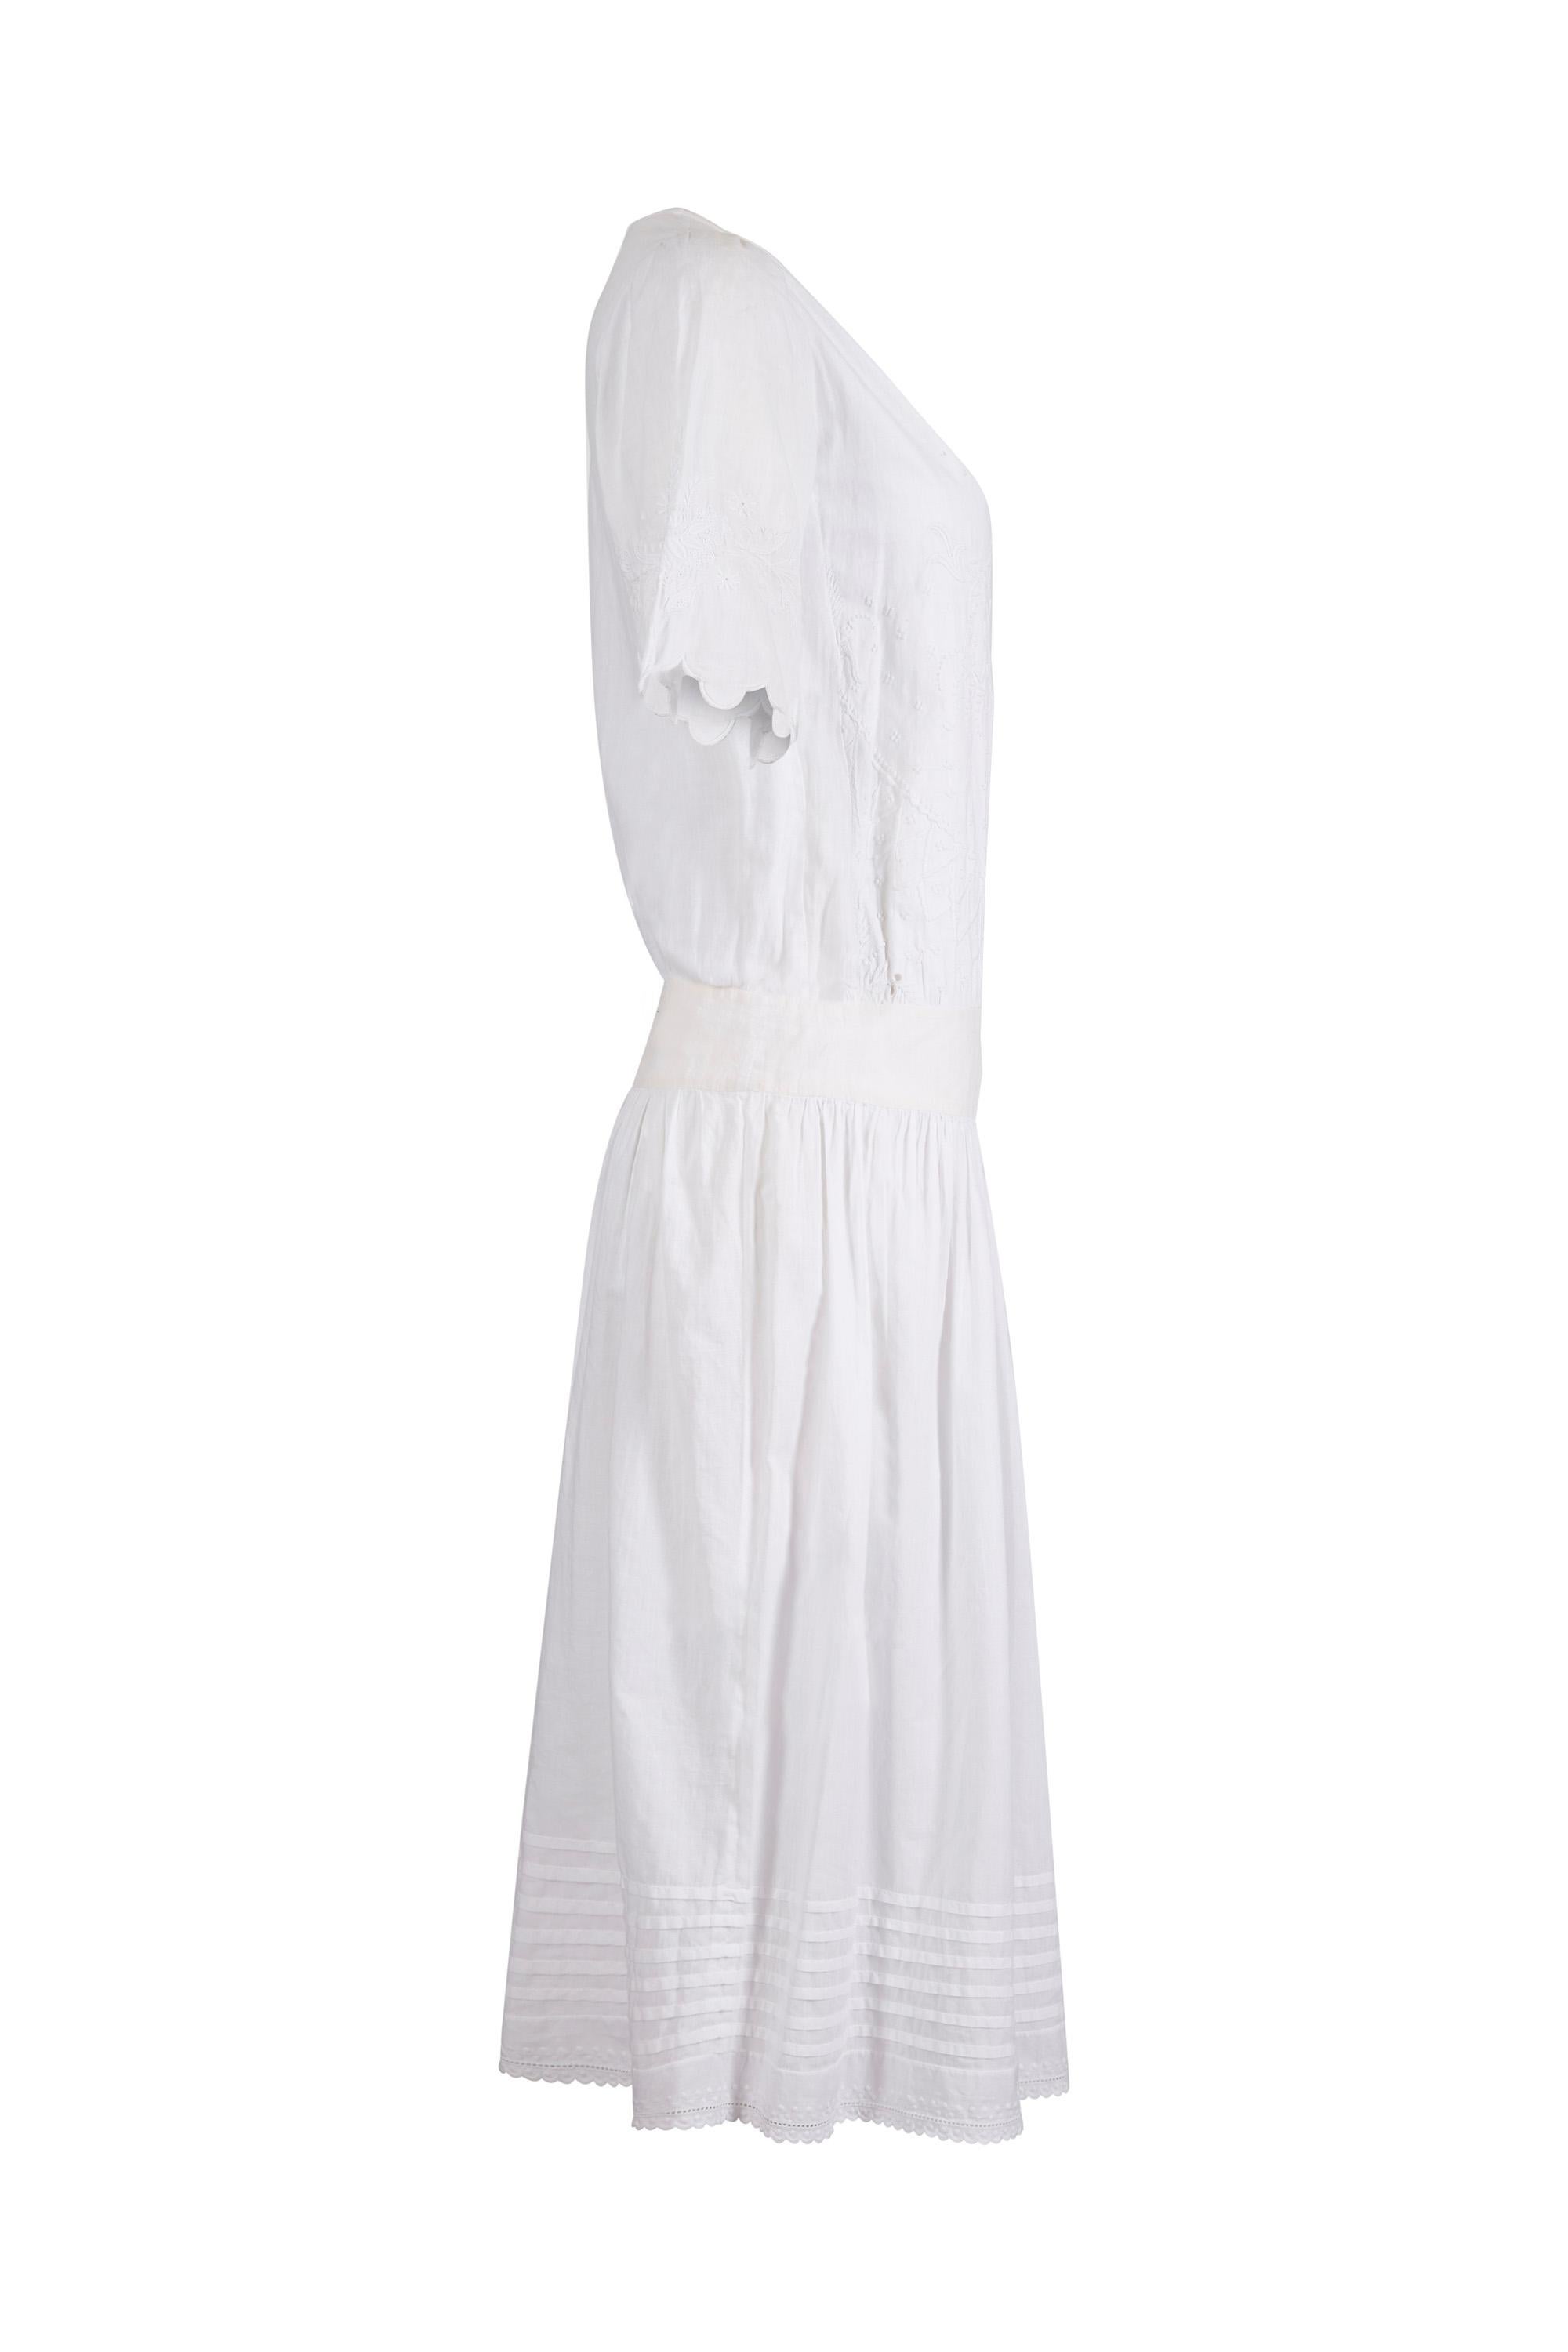 This exquisite antique 1920s hand embroidered cotton whitework tea dress is in absolutely astonishing vintage condition for a piece of this era, with no flaws to mention and would make an enchanting choice of alternative bridal wear. The dress is a